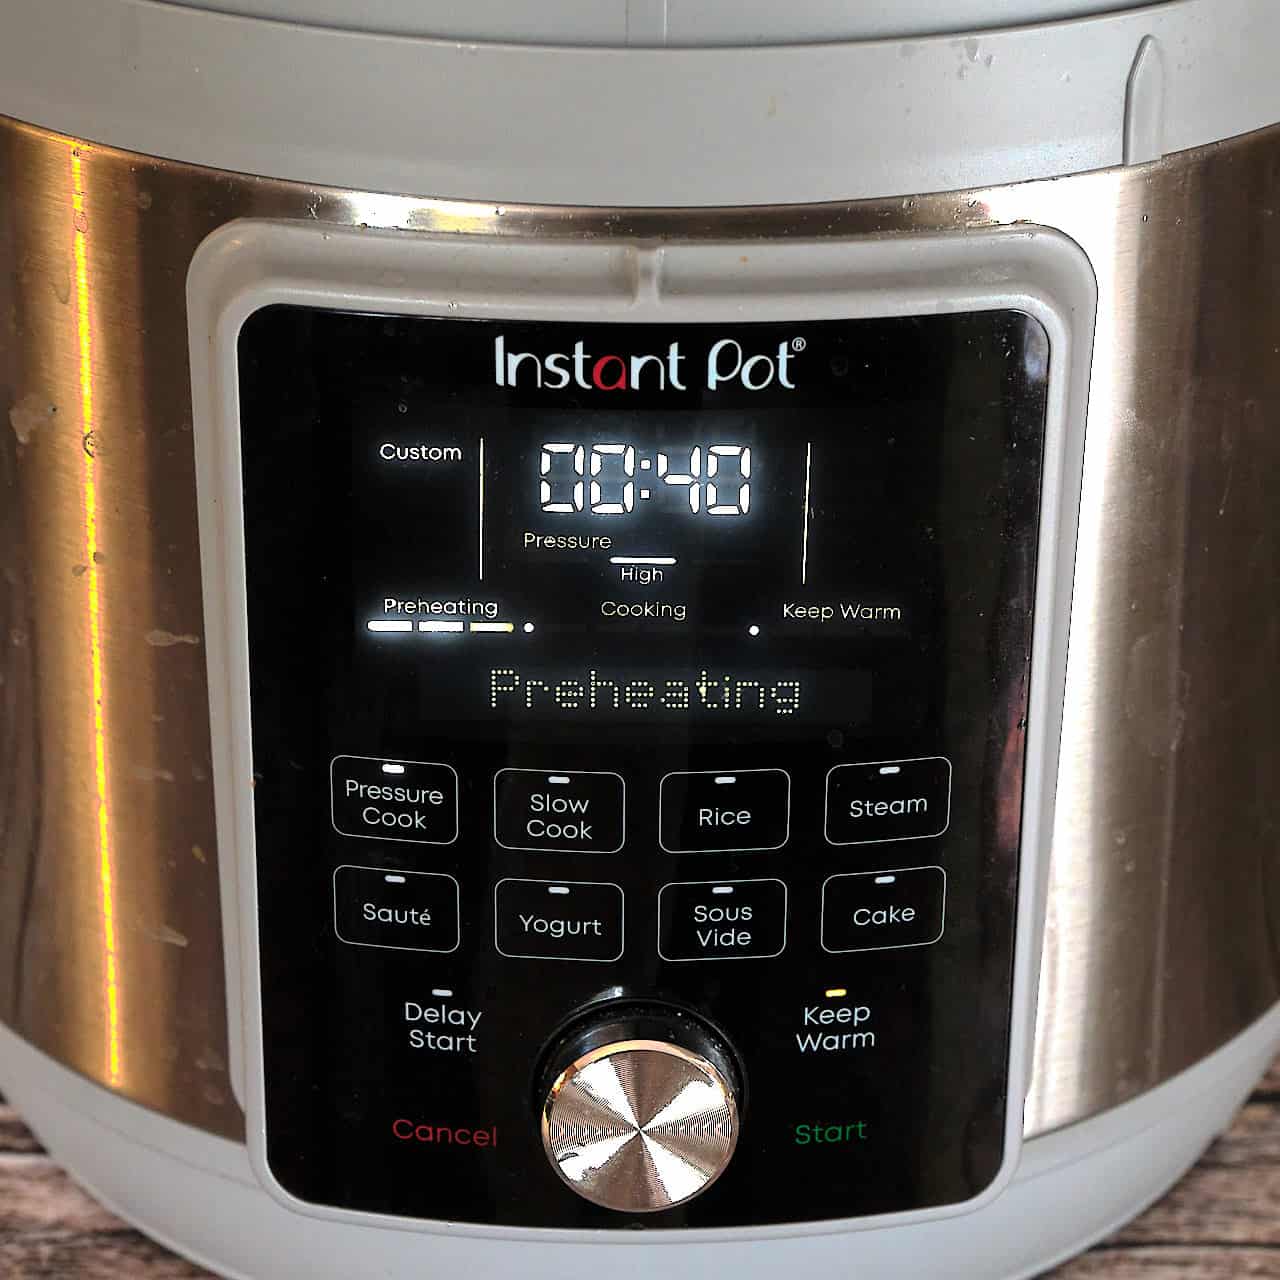 An Instant Pot set to pressure cook for 40 minutes on high pressure